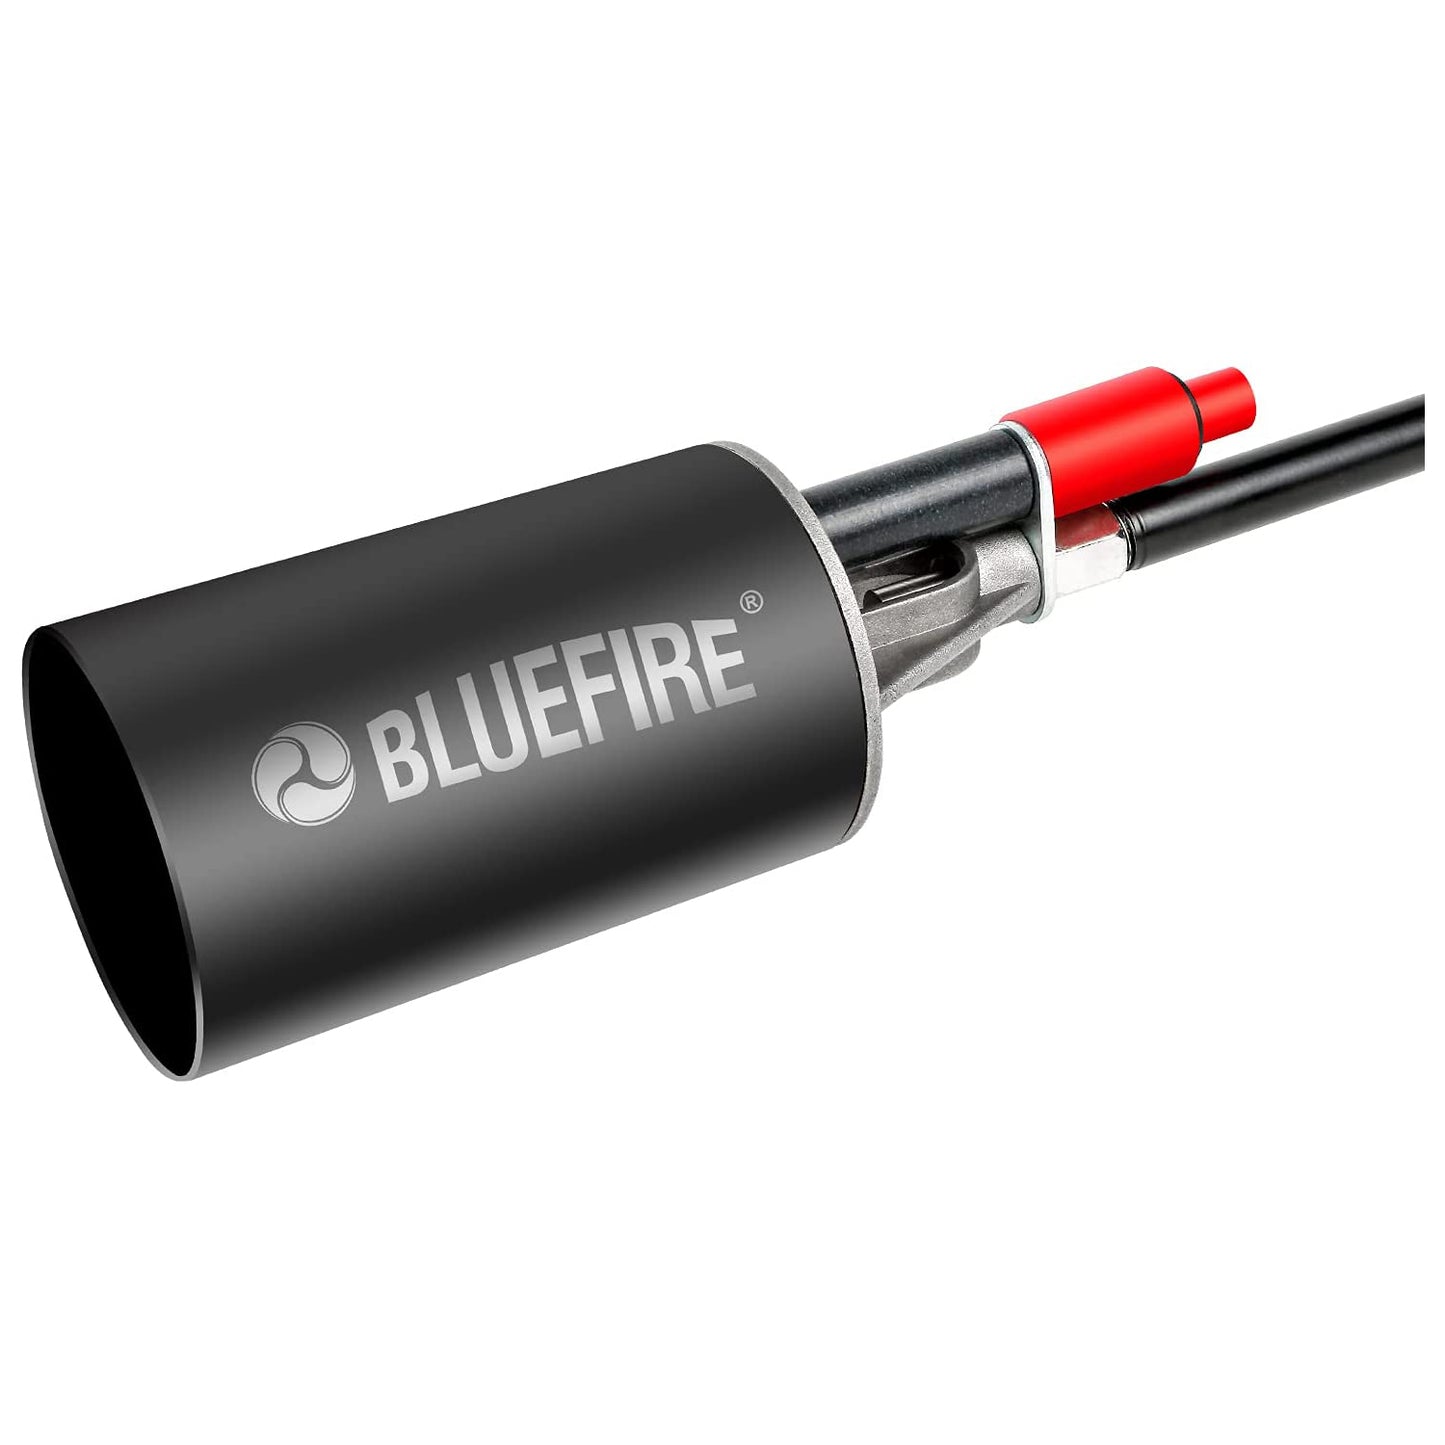 BF-1706 150,000 BTU High Output Propane Torch Weed Burner with 10ft Hose Trigger Start Heavy-Duty Turbo Jumbo Flame Garden Blowtorch